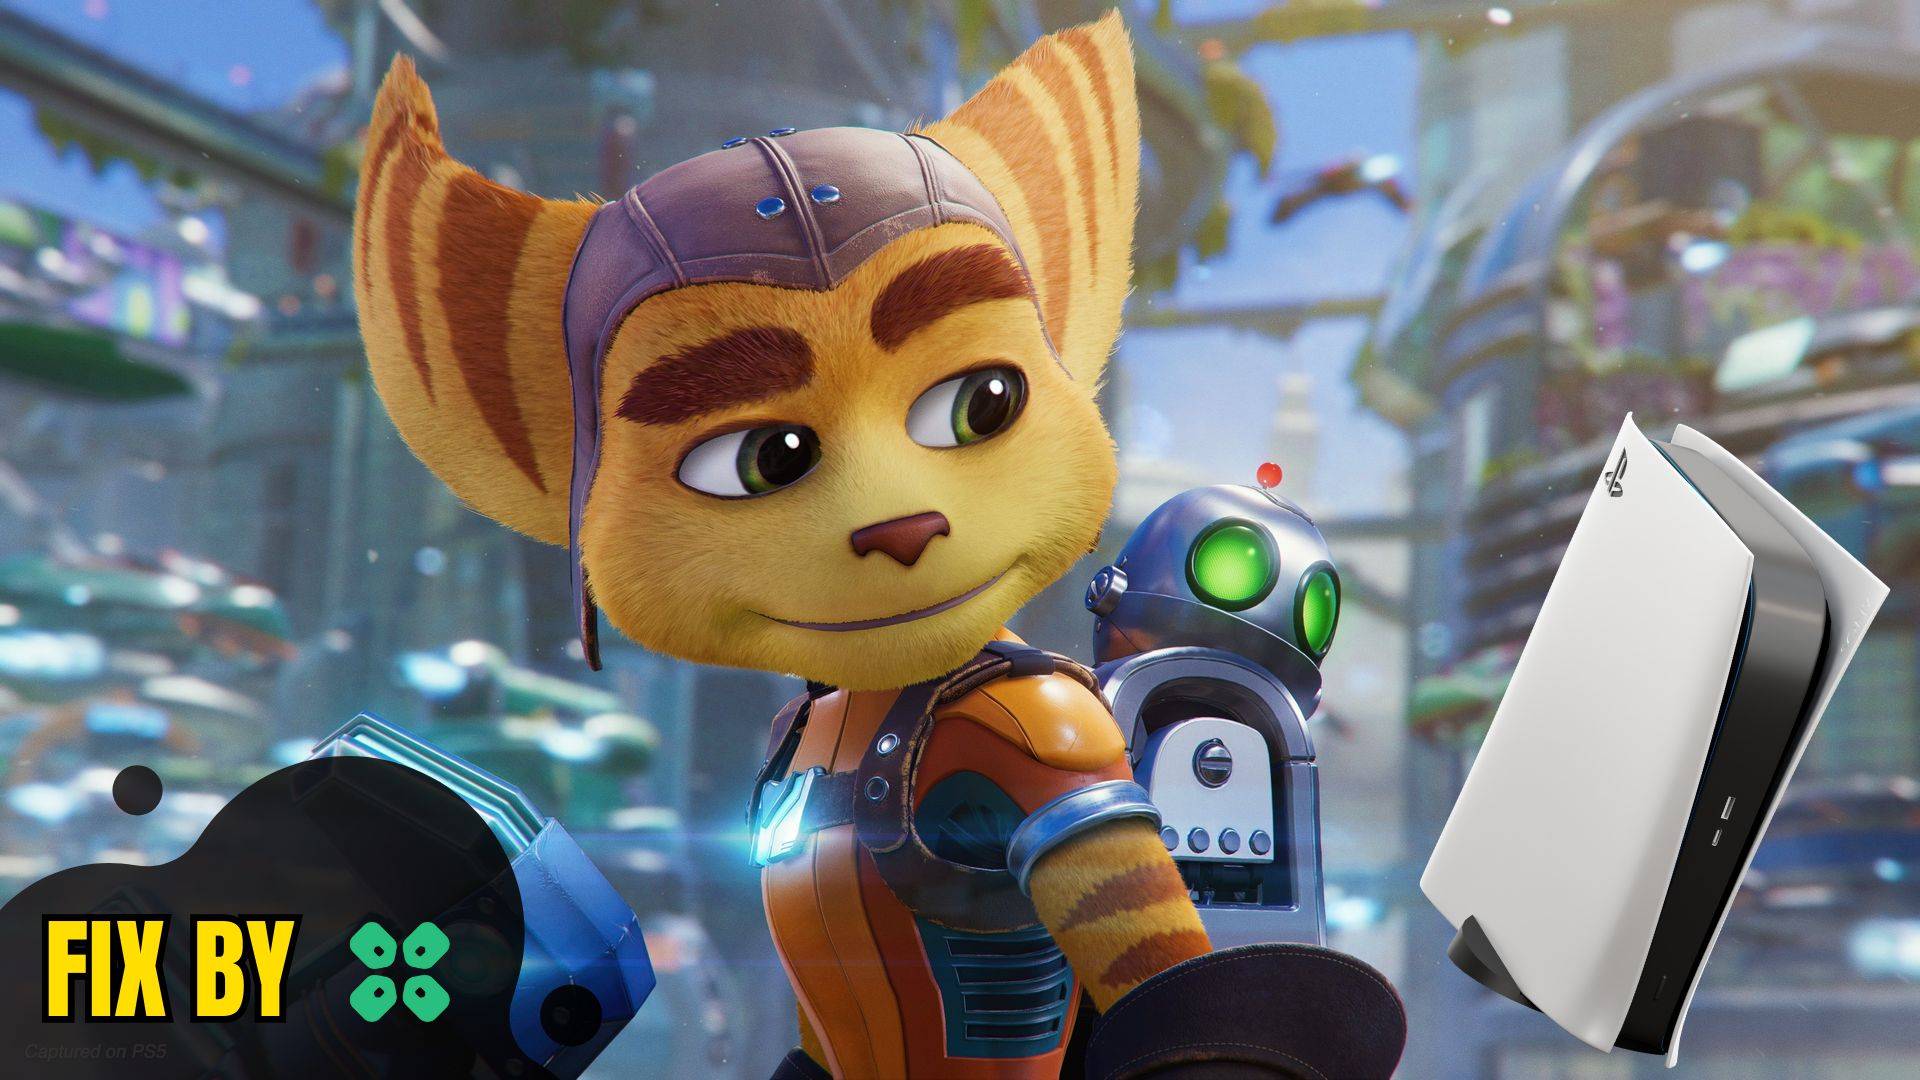 Artwork of Ratchet & Clank Rift Apart and its fix of Network issues by TCG